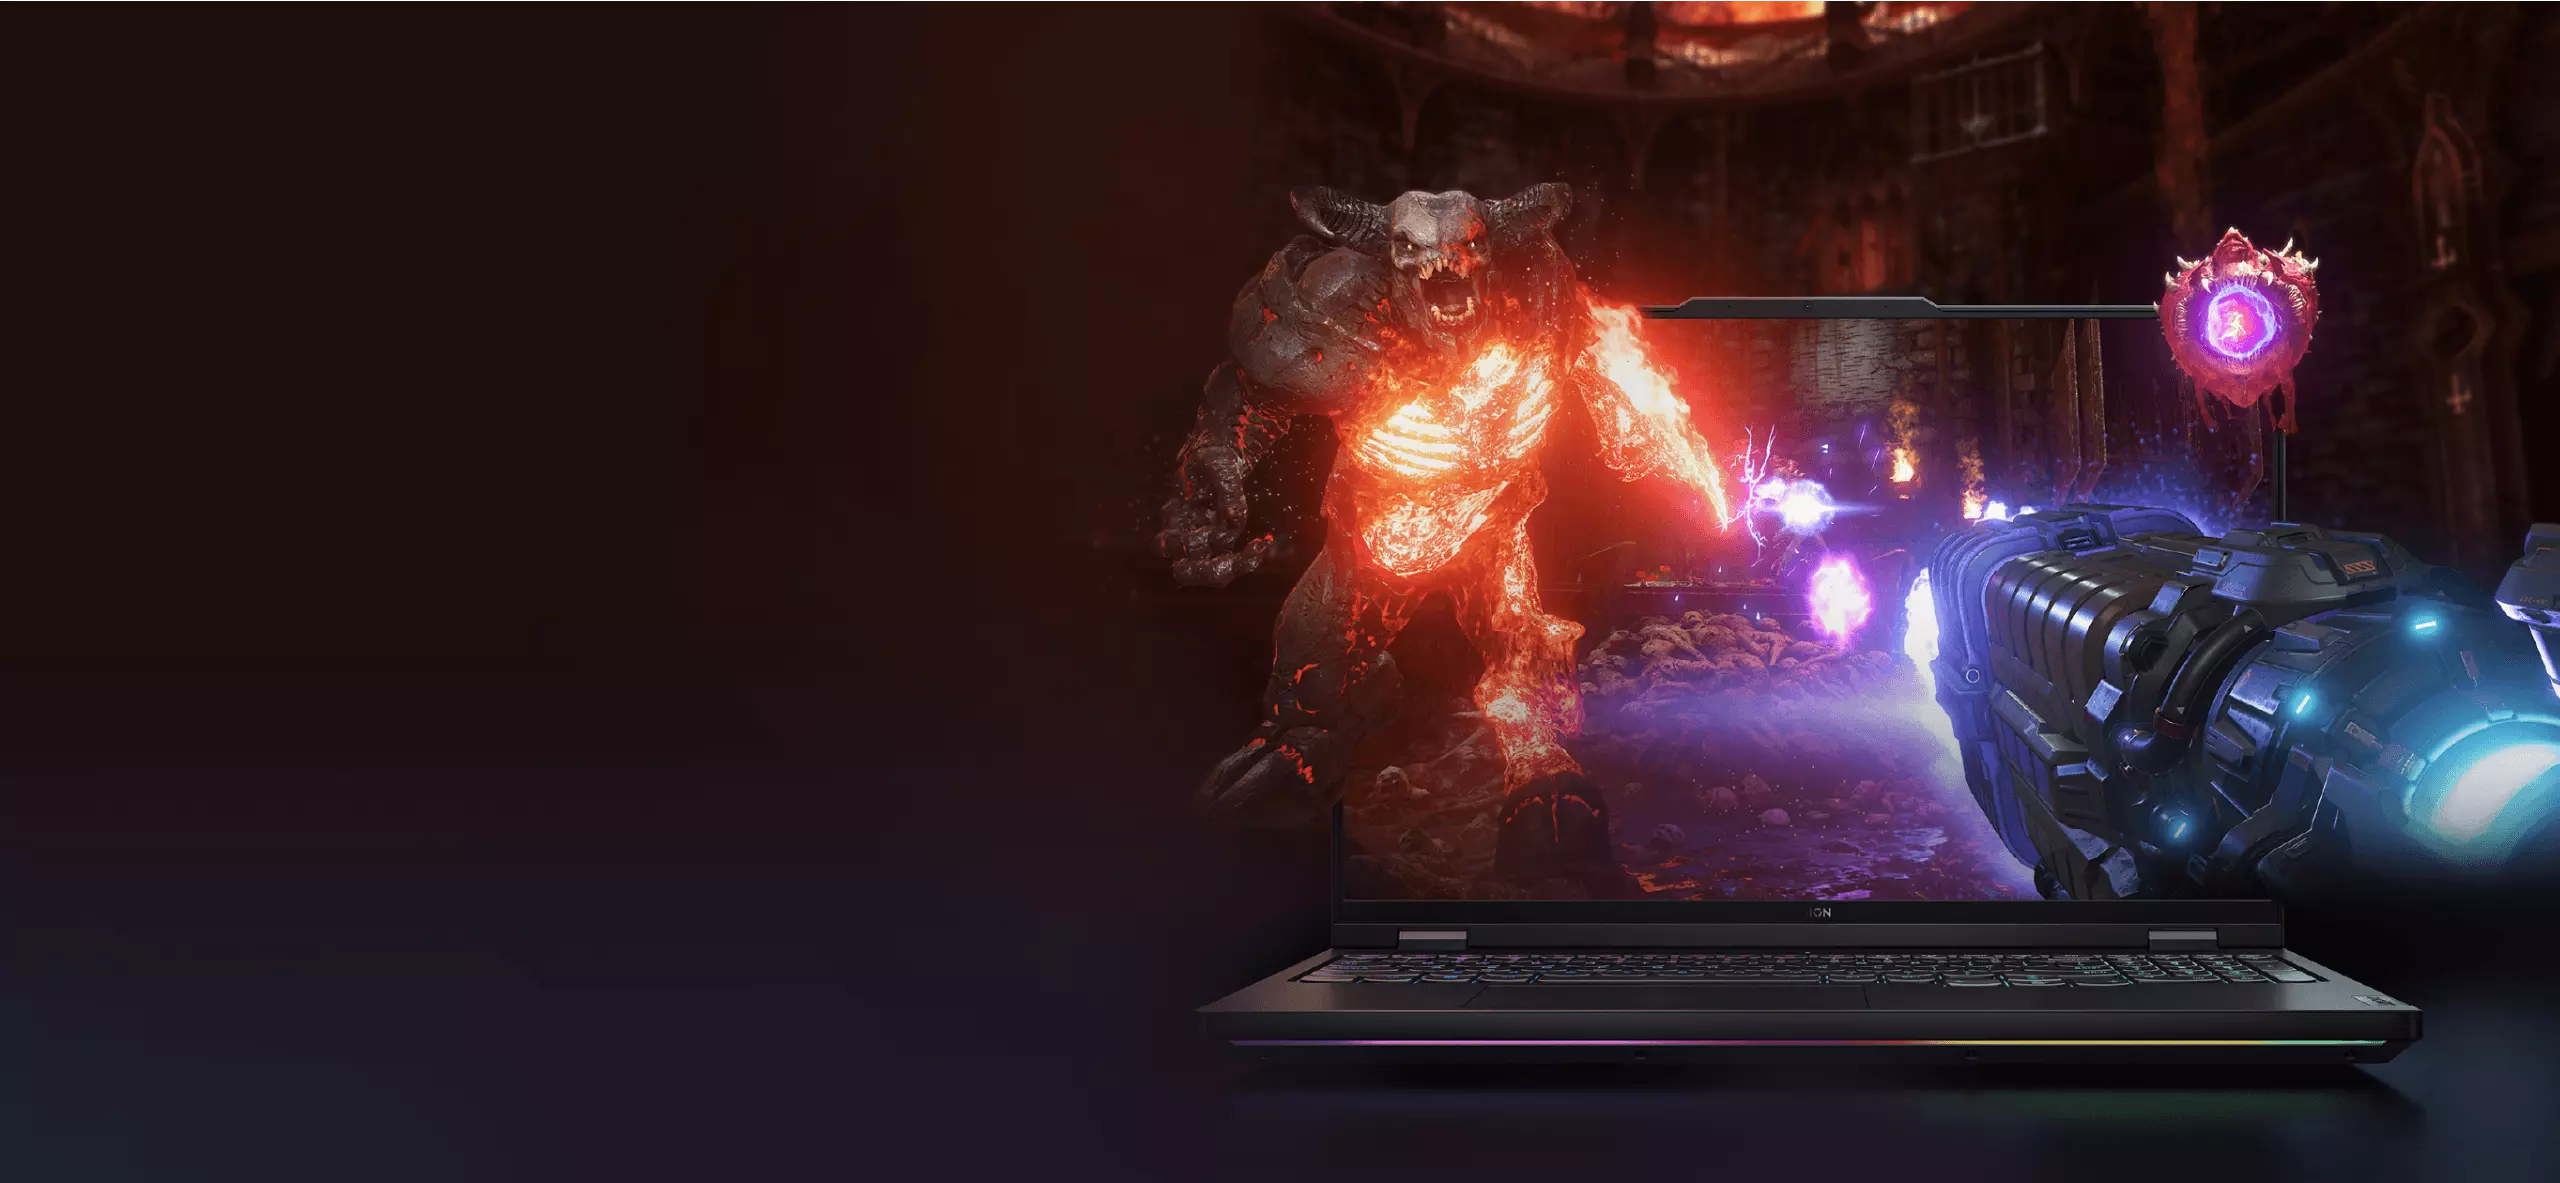 Frontal close-up view of Lenovo Legion Pro 7 open to 90 degrees with game image bursting out of the display.